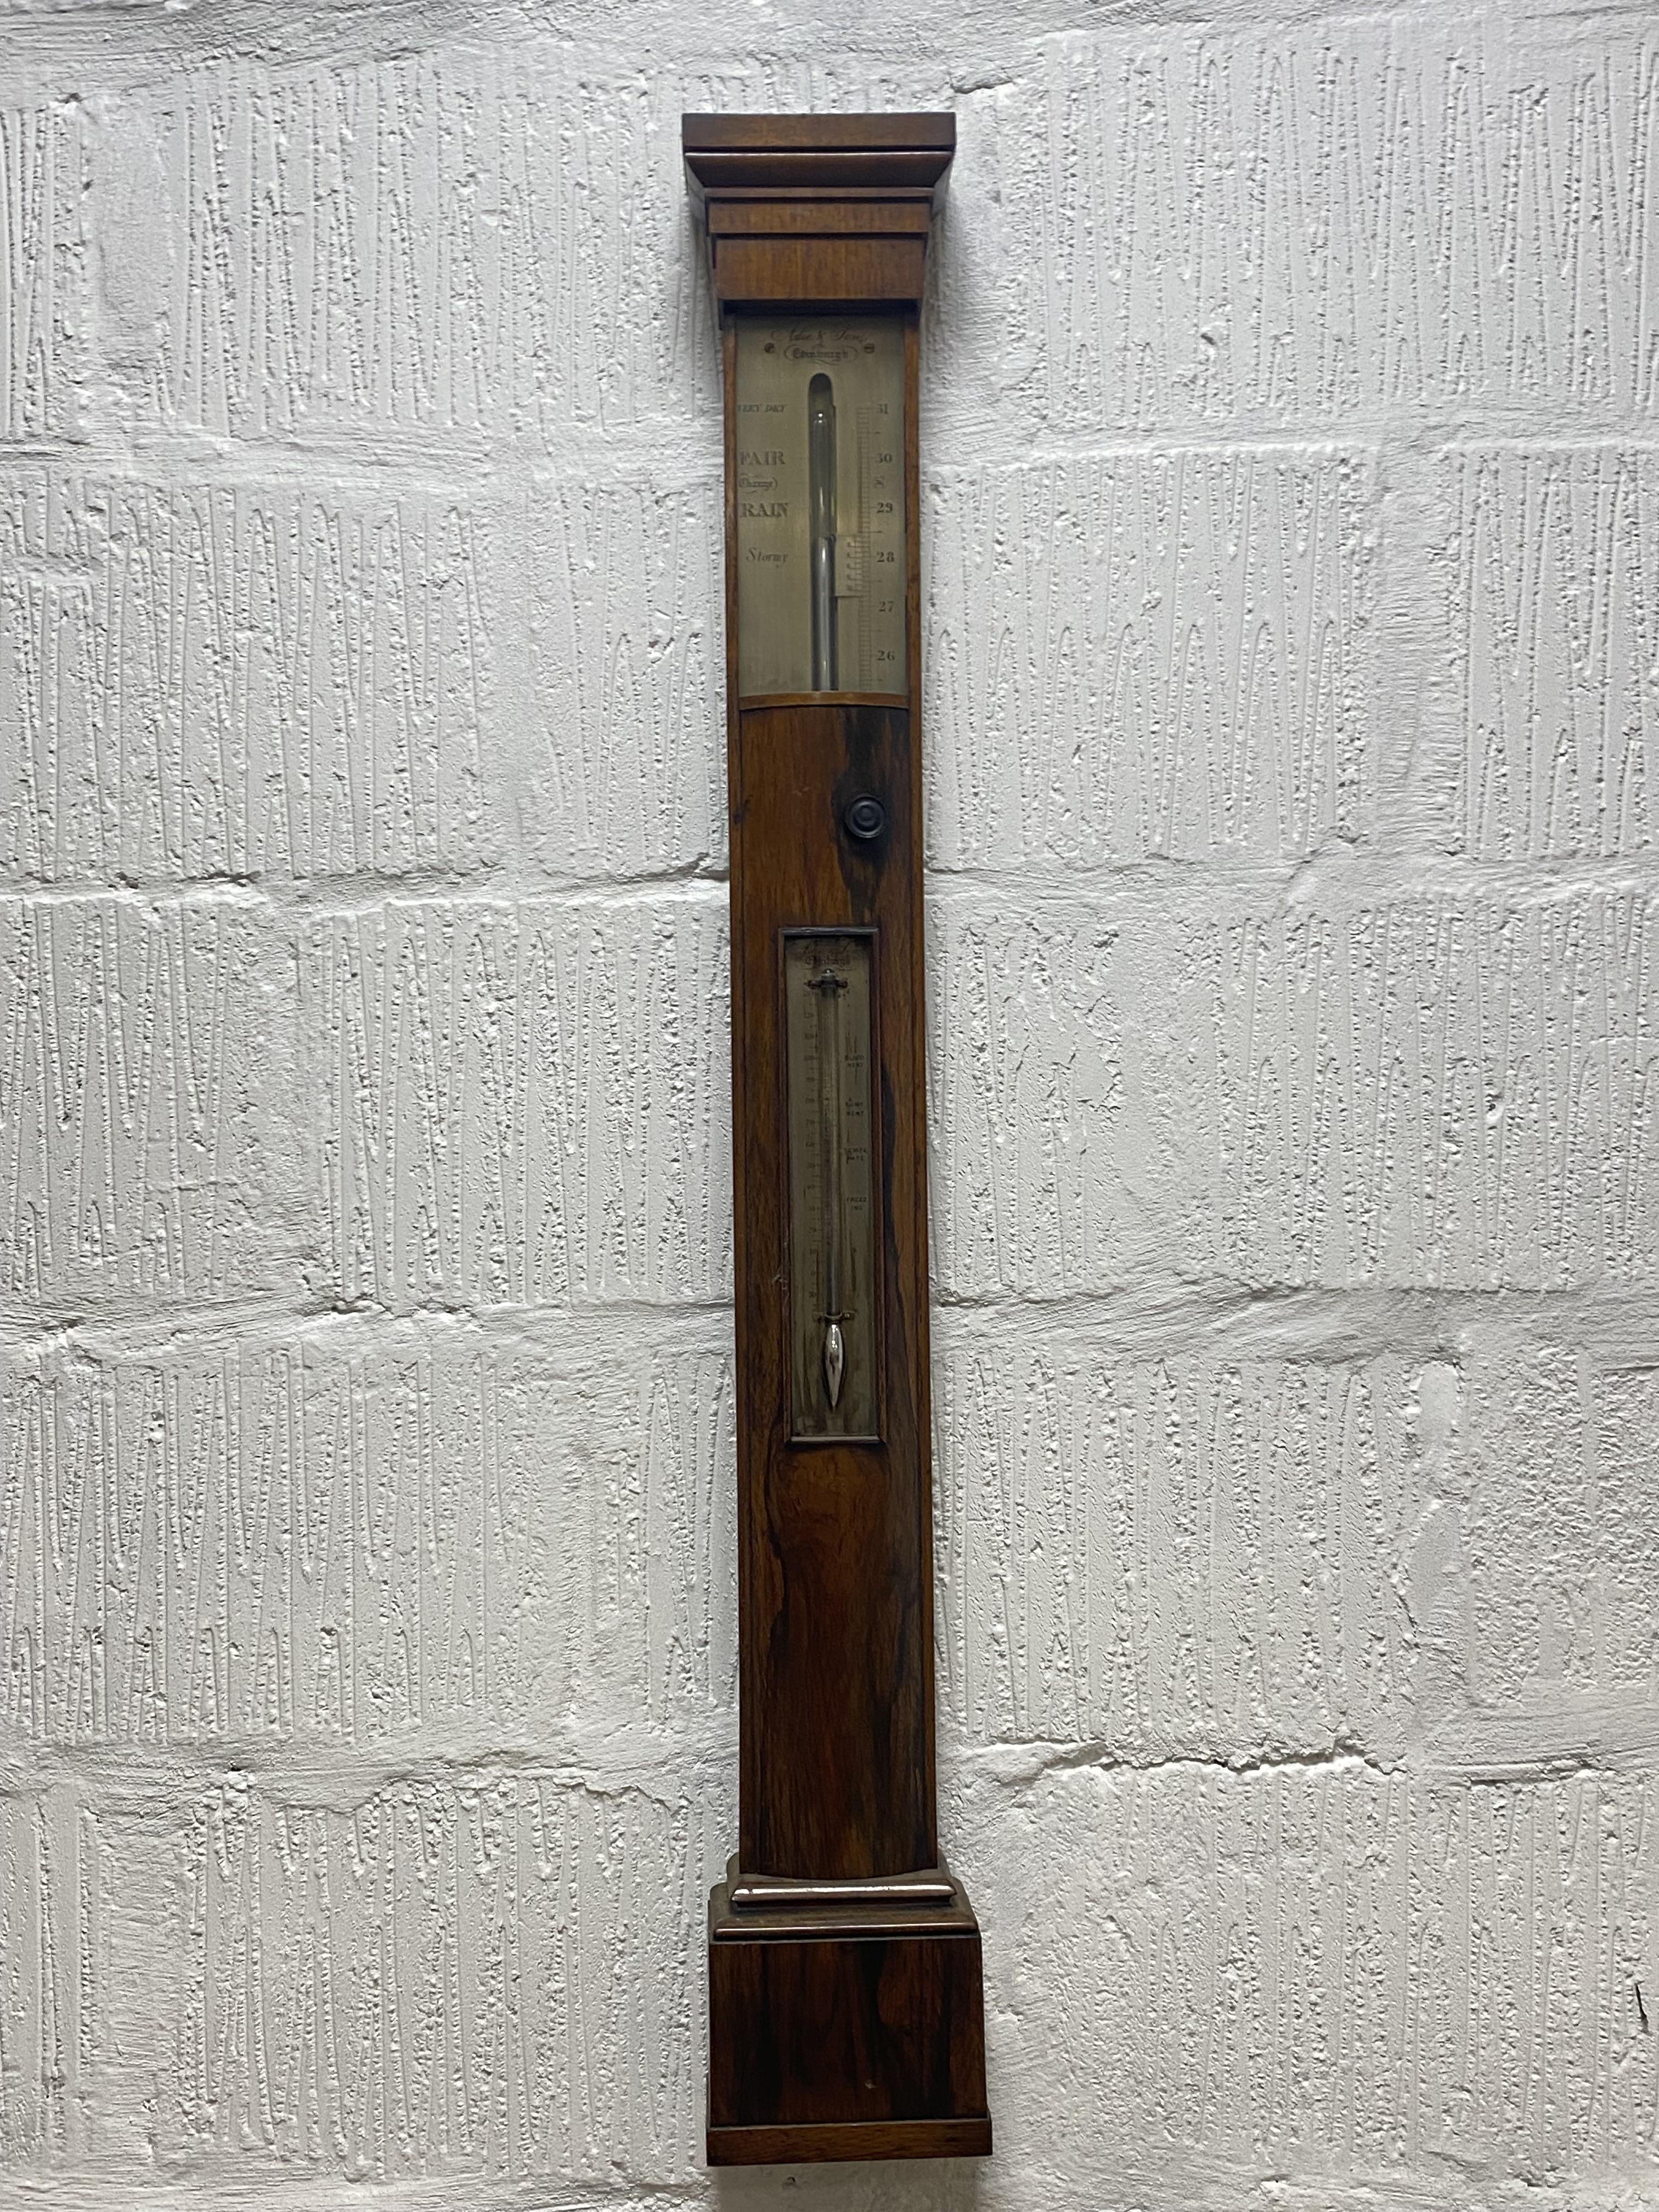 A Regency rosewood cased stick barometer by Adie & Son, Edinburgh, the projecting cornice above a